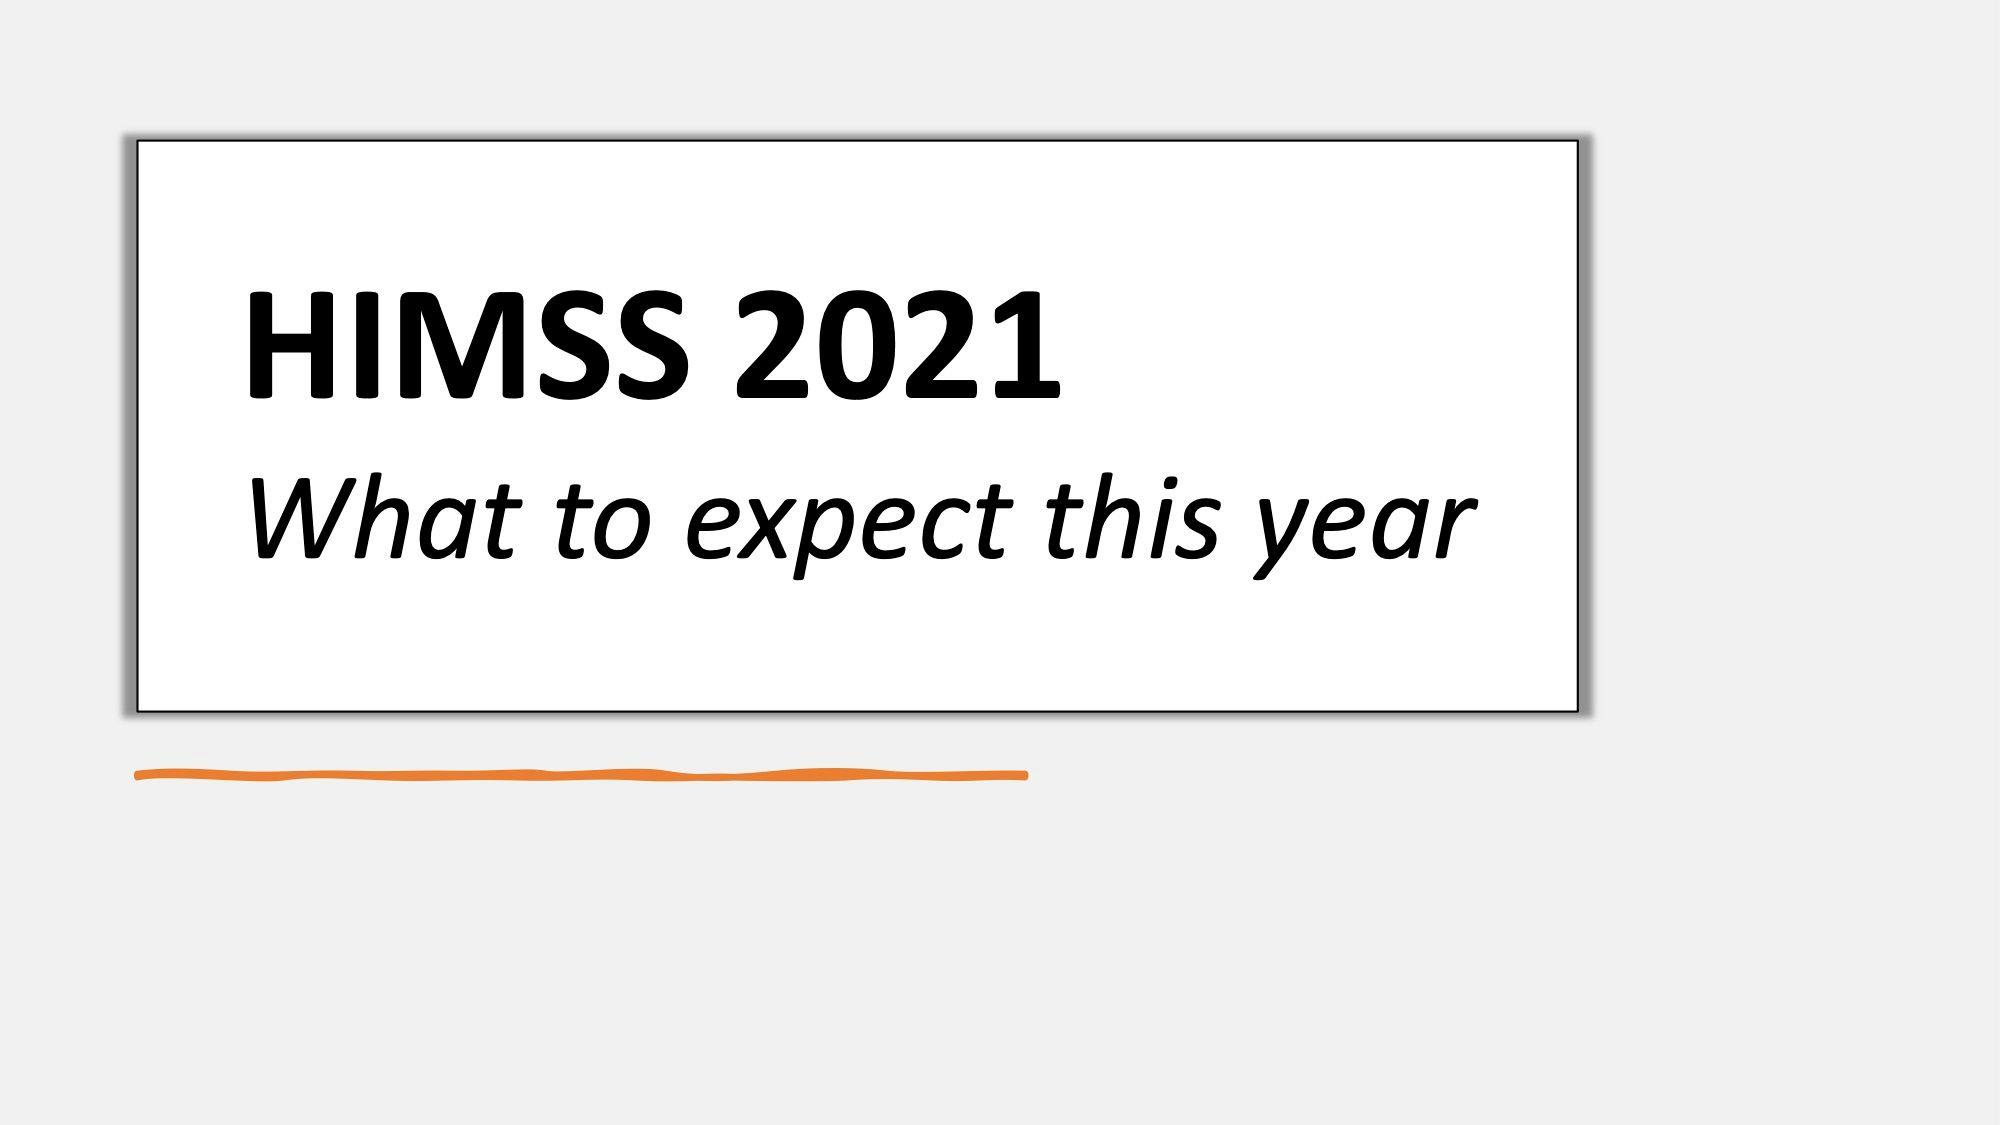 HIMSS 2021 expectations